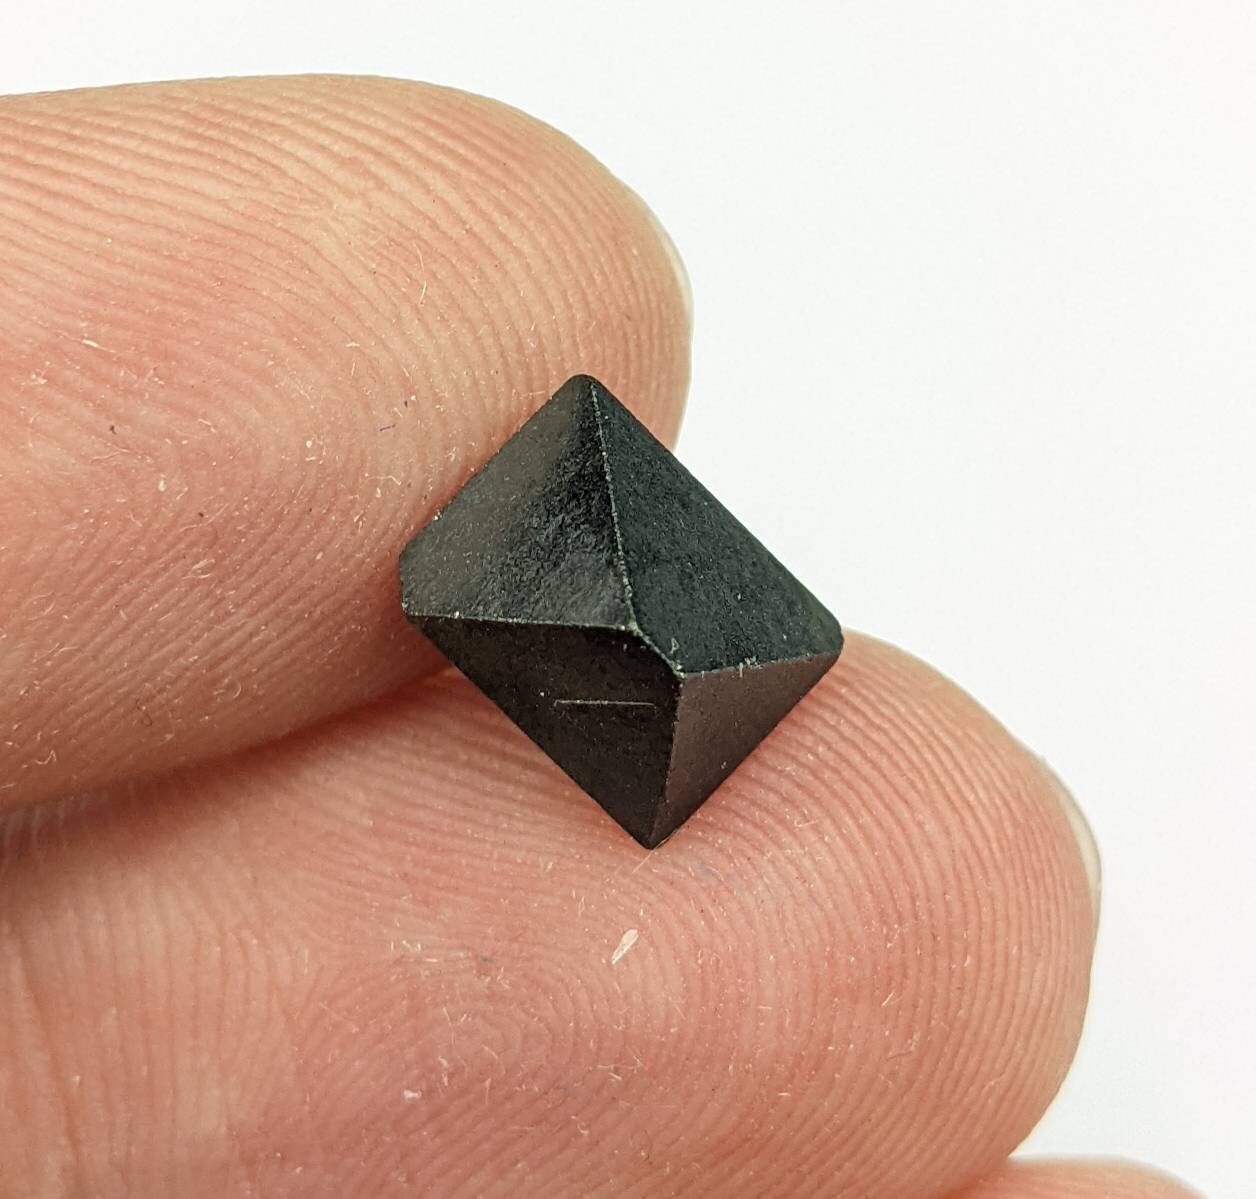 ARSAA GEMS AND MINERALSSmall lot of Black Magnetite crystal with octahedral structure from Skardu Gilgit Baltistan Pakistan, 8.7 grams - Premium  from ARSAA GEMS AND MINERALS - Just $30.00! Shop now at ARSAA GEMS AND MINERALS